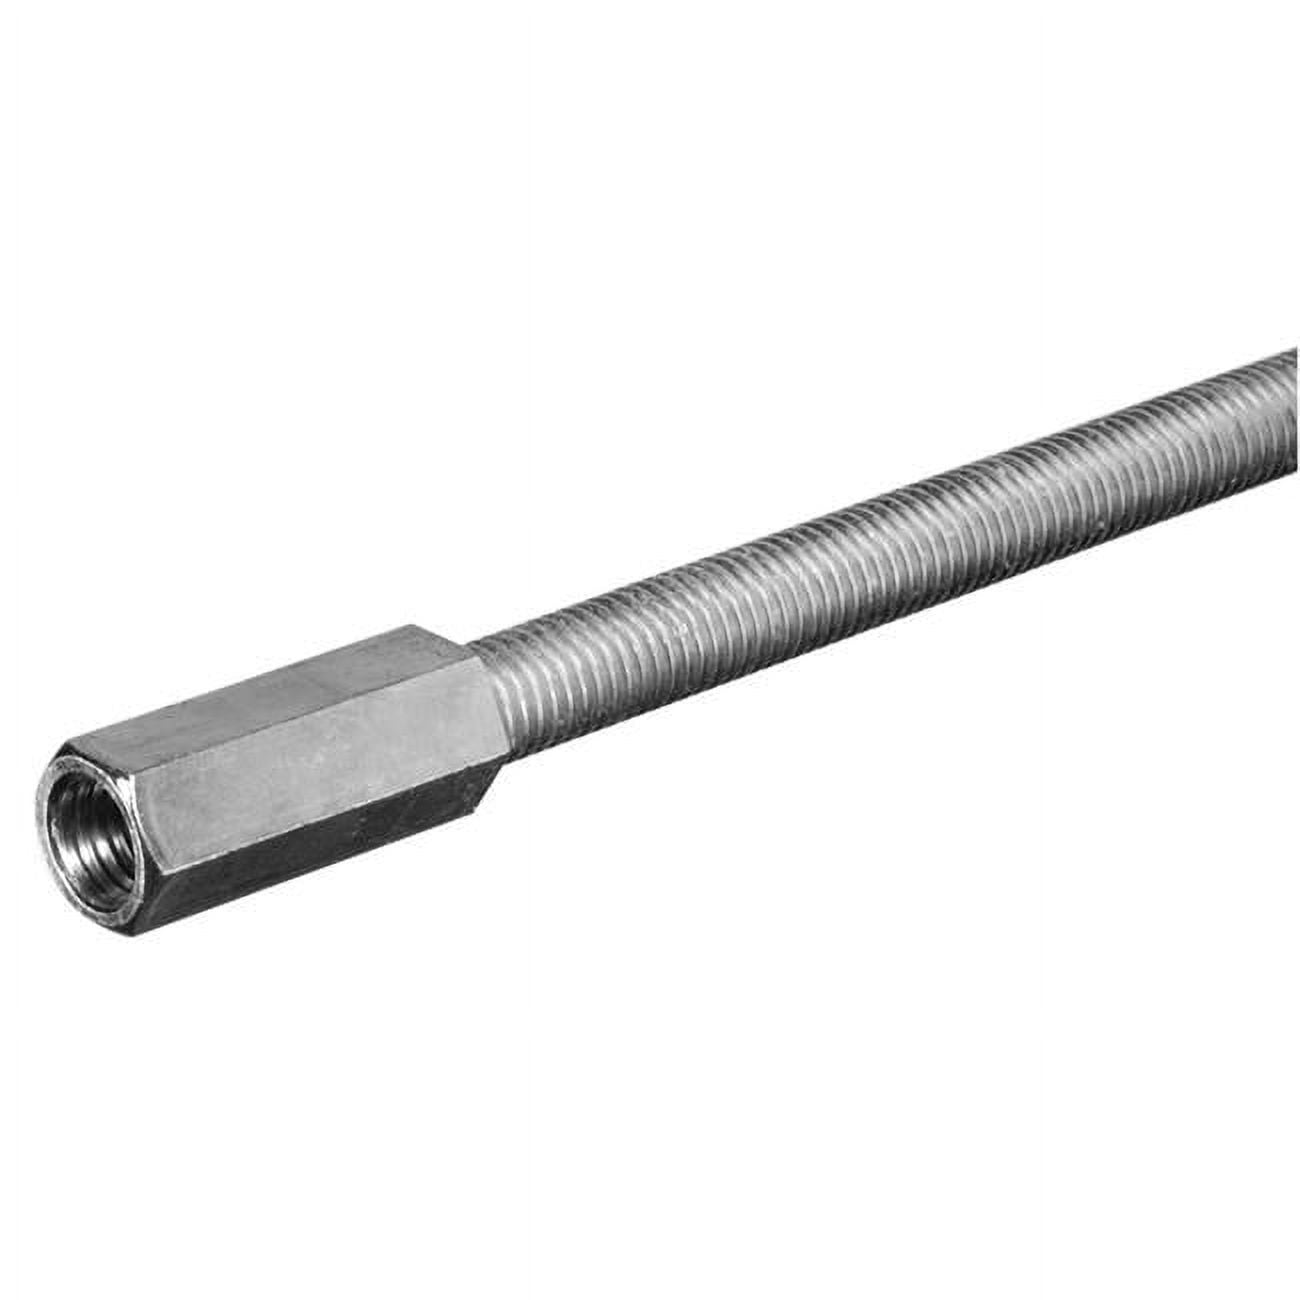 11844 0.31 In. Coupling Nut - 18 Thread Per Inch